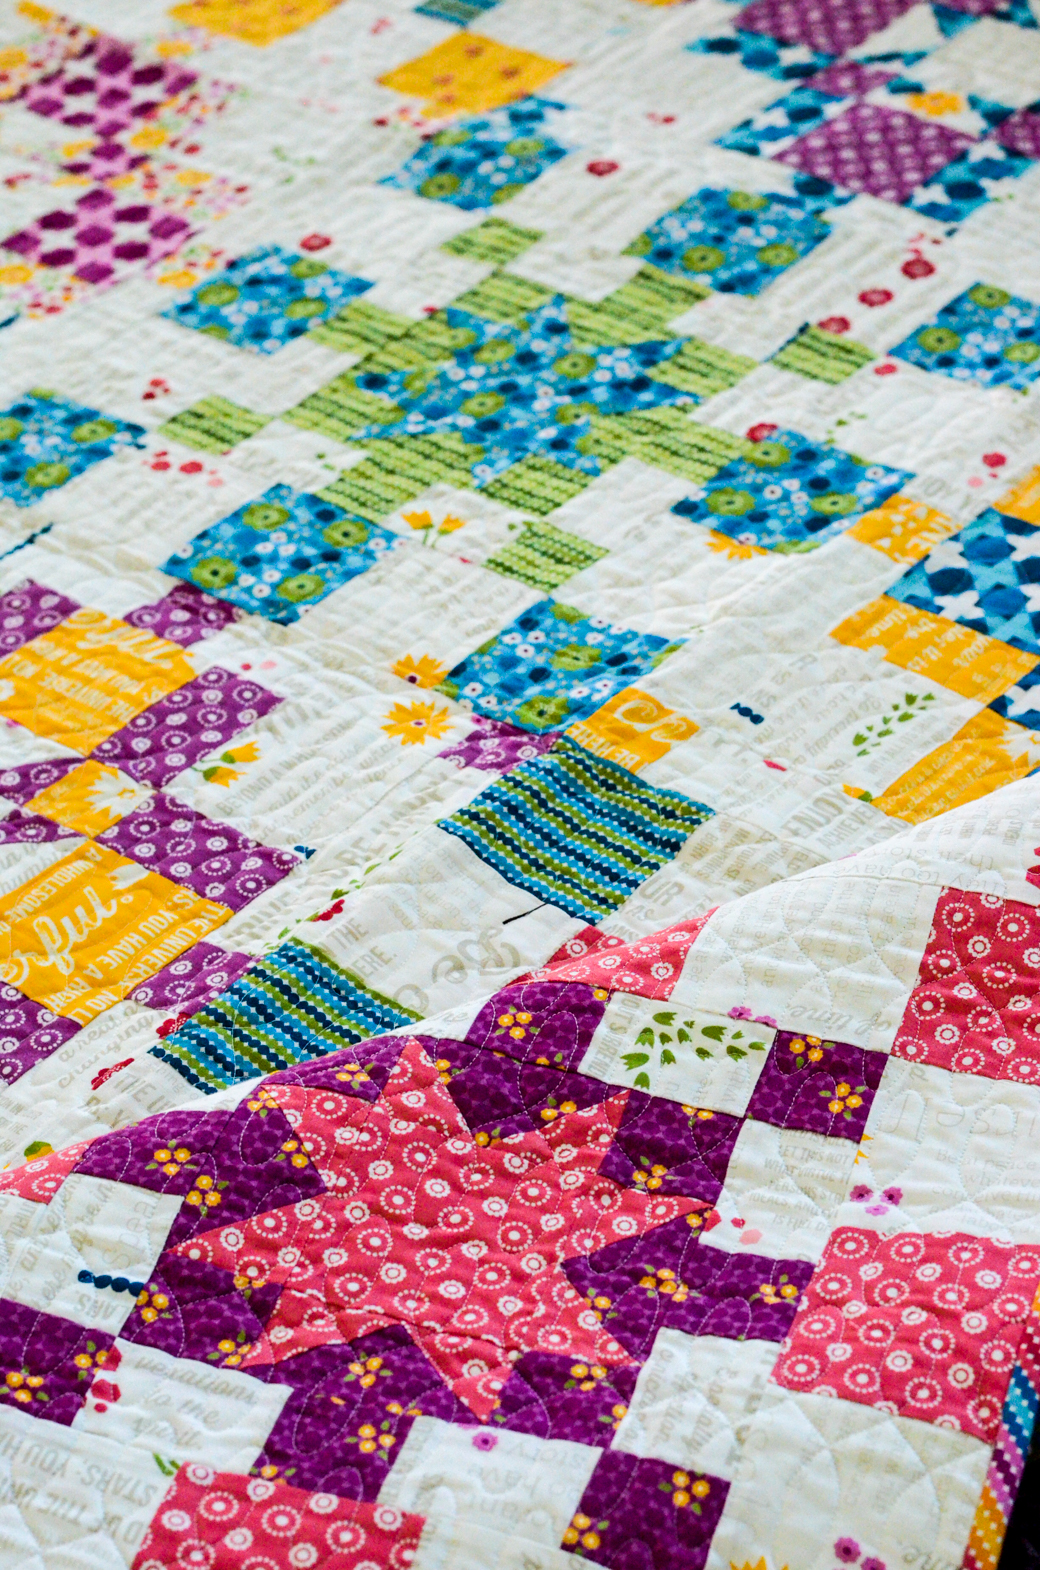 Solstice Quilt by April Rosenthal for Prairie Grass Patterns